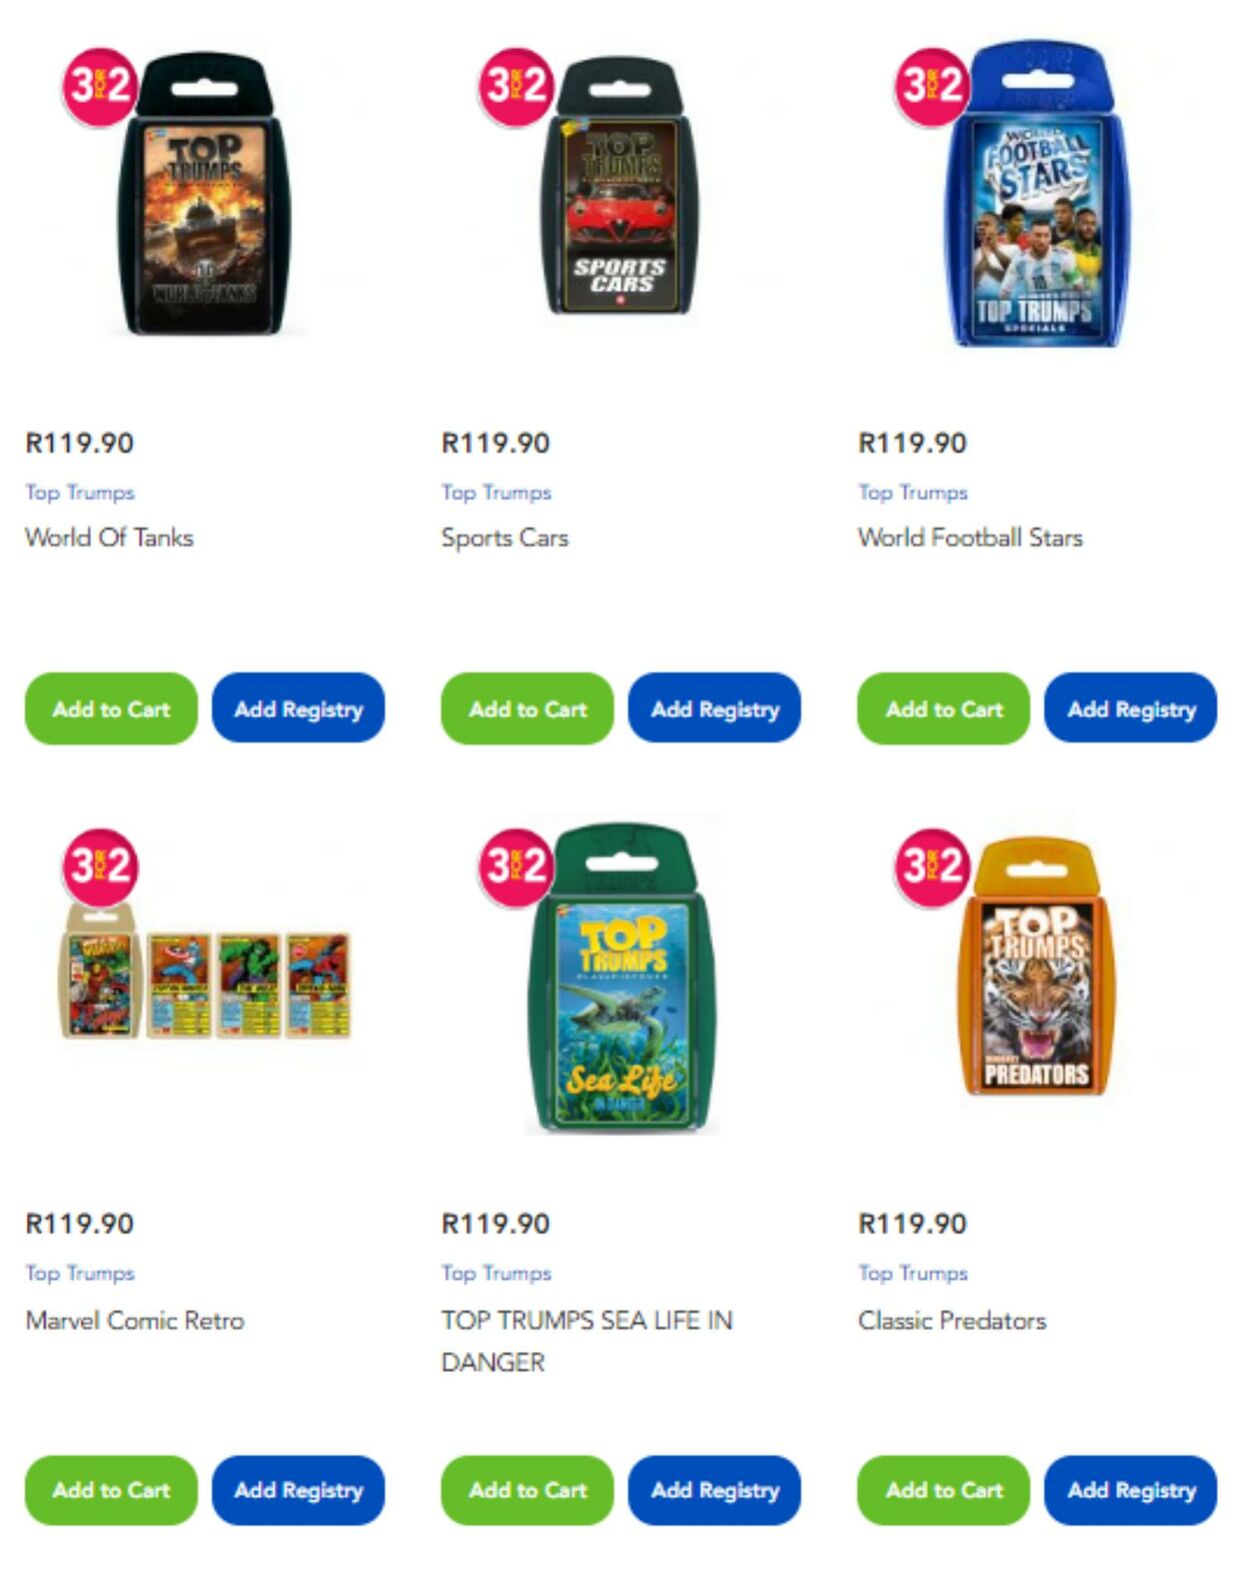 Special Toys R Us 18.07.2022 - 17.08.2022